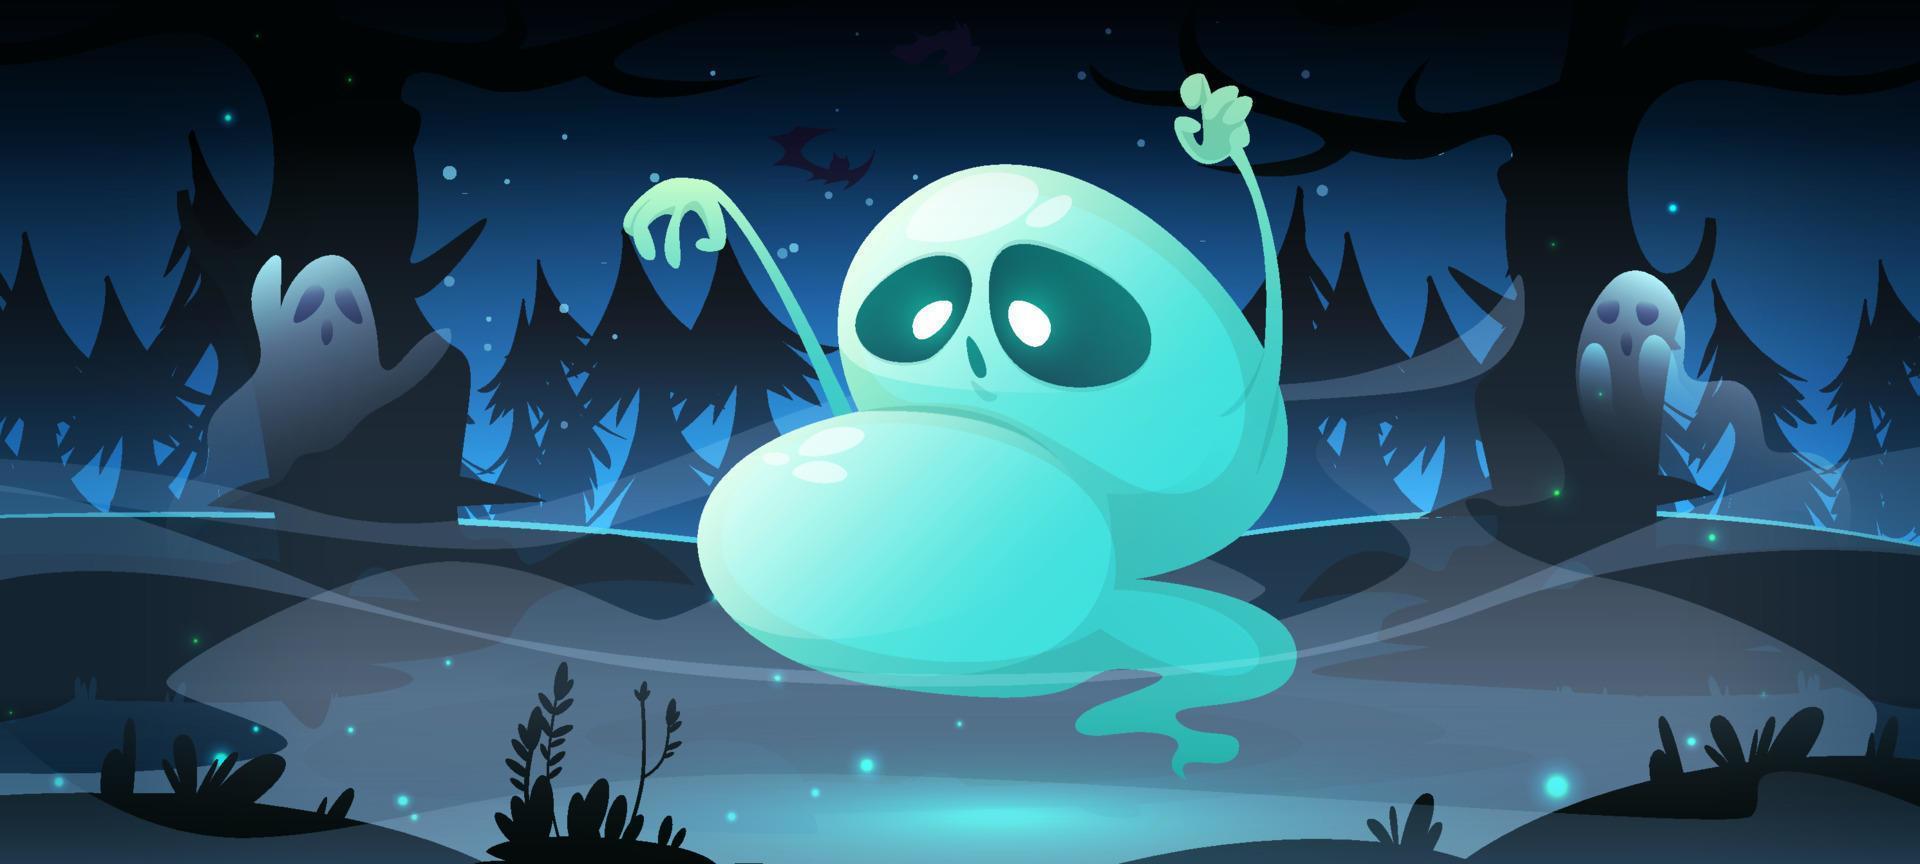 Spooky ghosts in dark forest at night vector